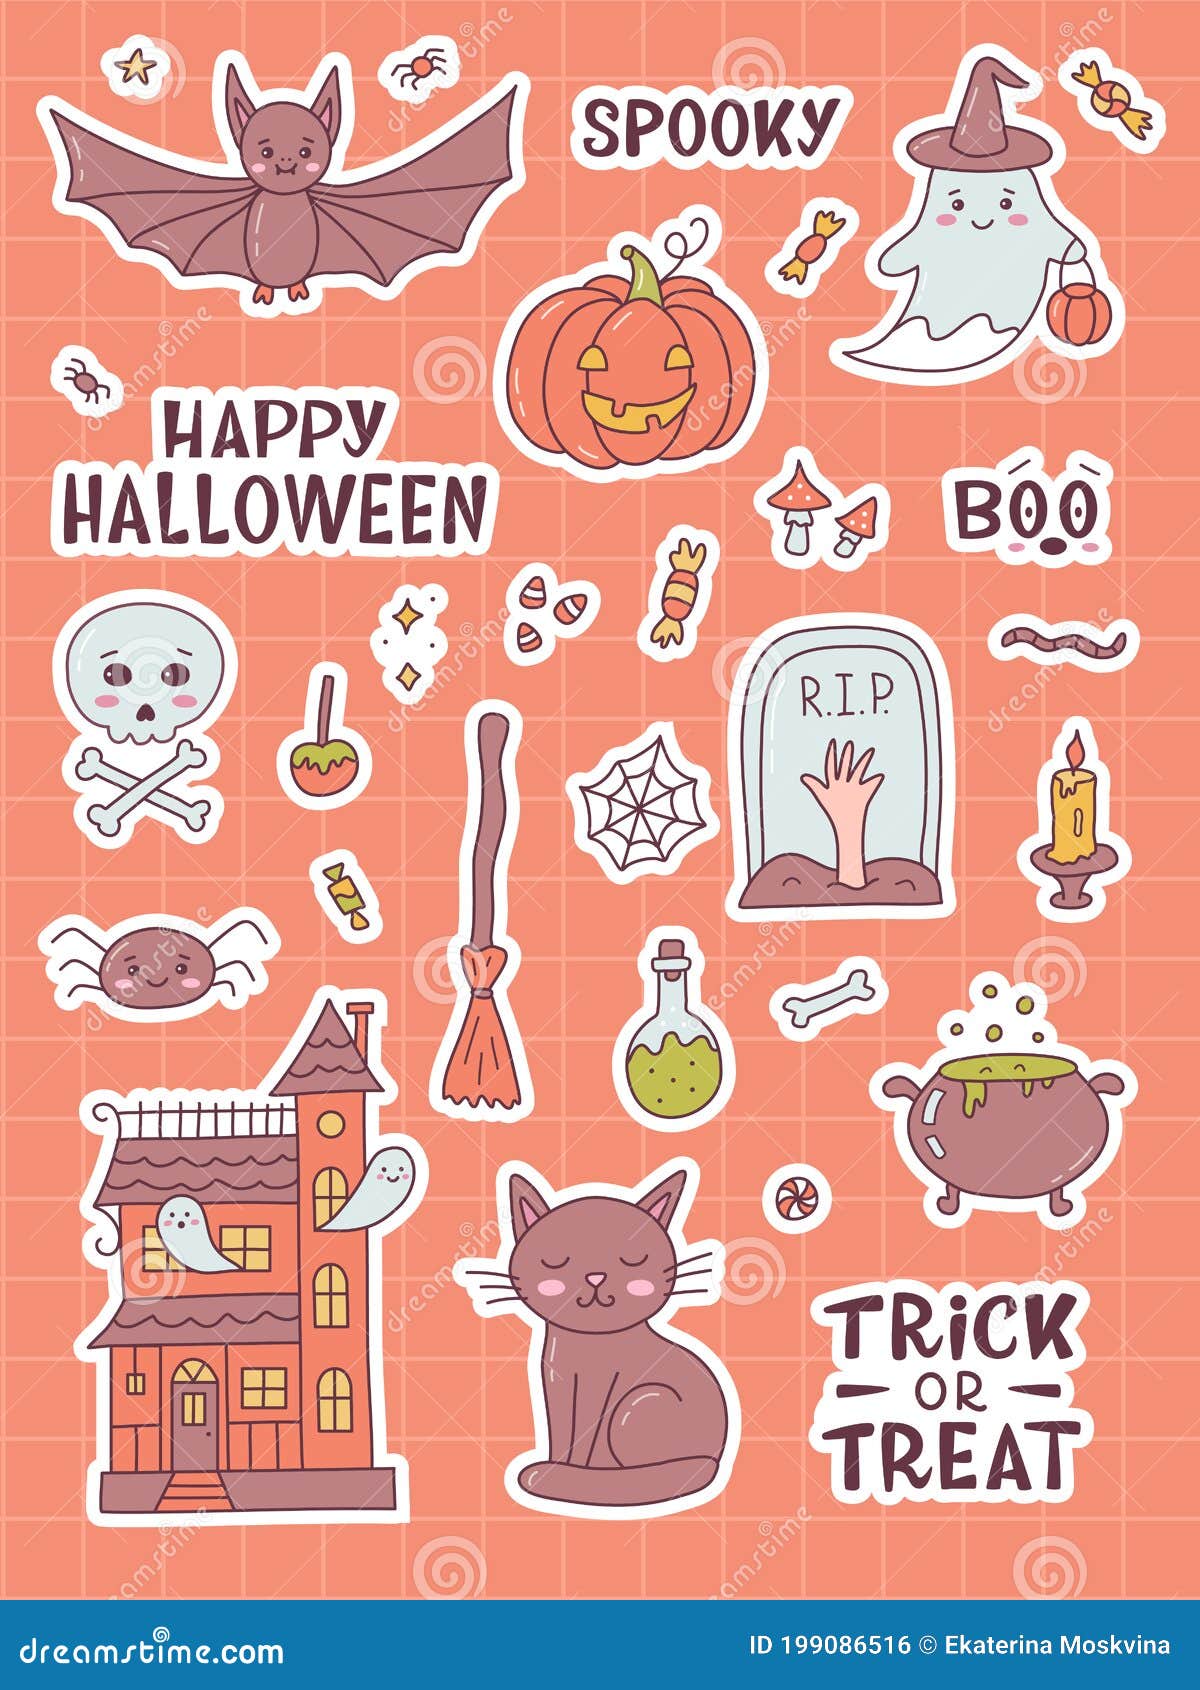 Kawaii Halloween Sticker Pack Stock Vector - Illustration of object,  collection: 199086516